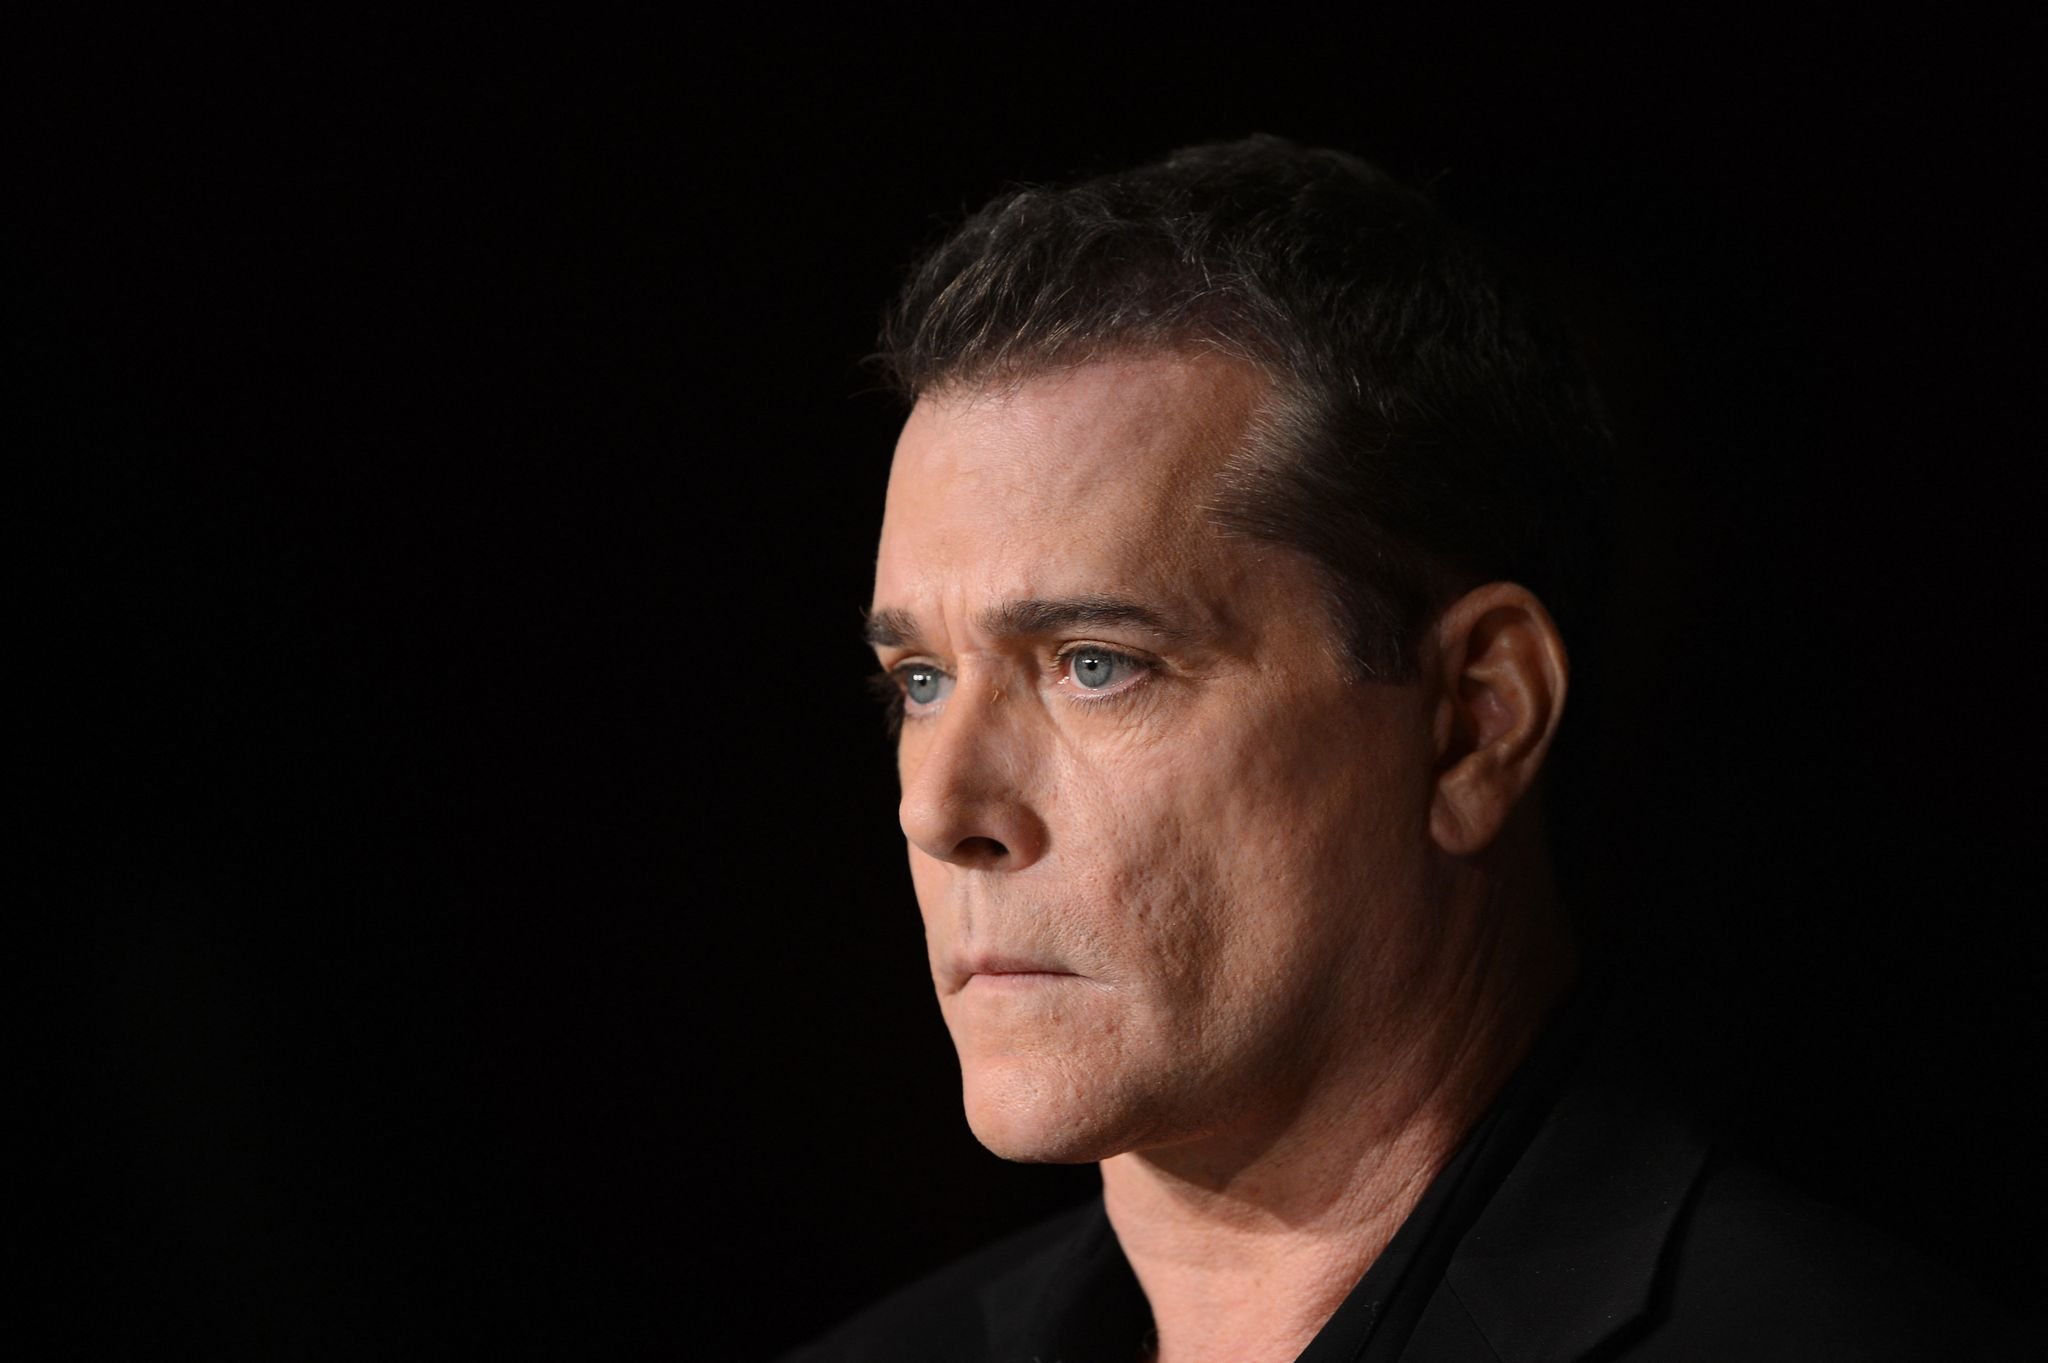 Ray Liotta during the press conference of "Killing them Softly" presented in competition at the 65th Cannes film festival on May 22, 2012 in Cannes. | Source: Getty Images